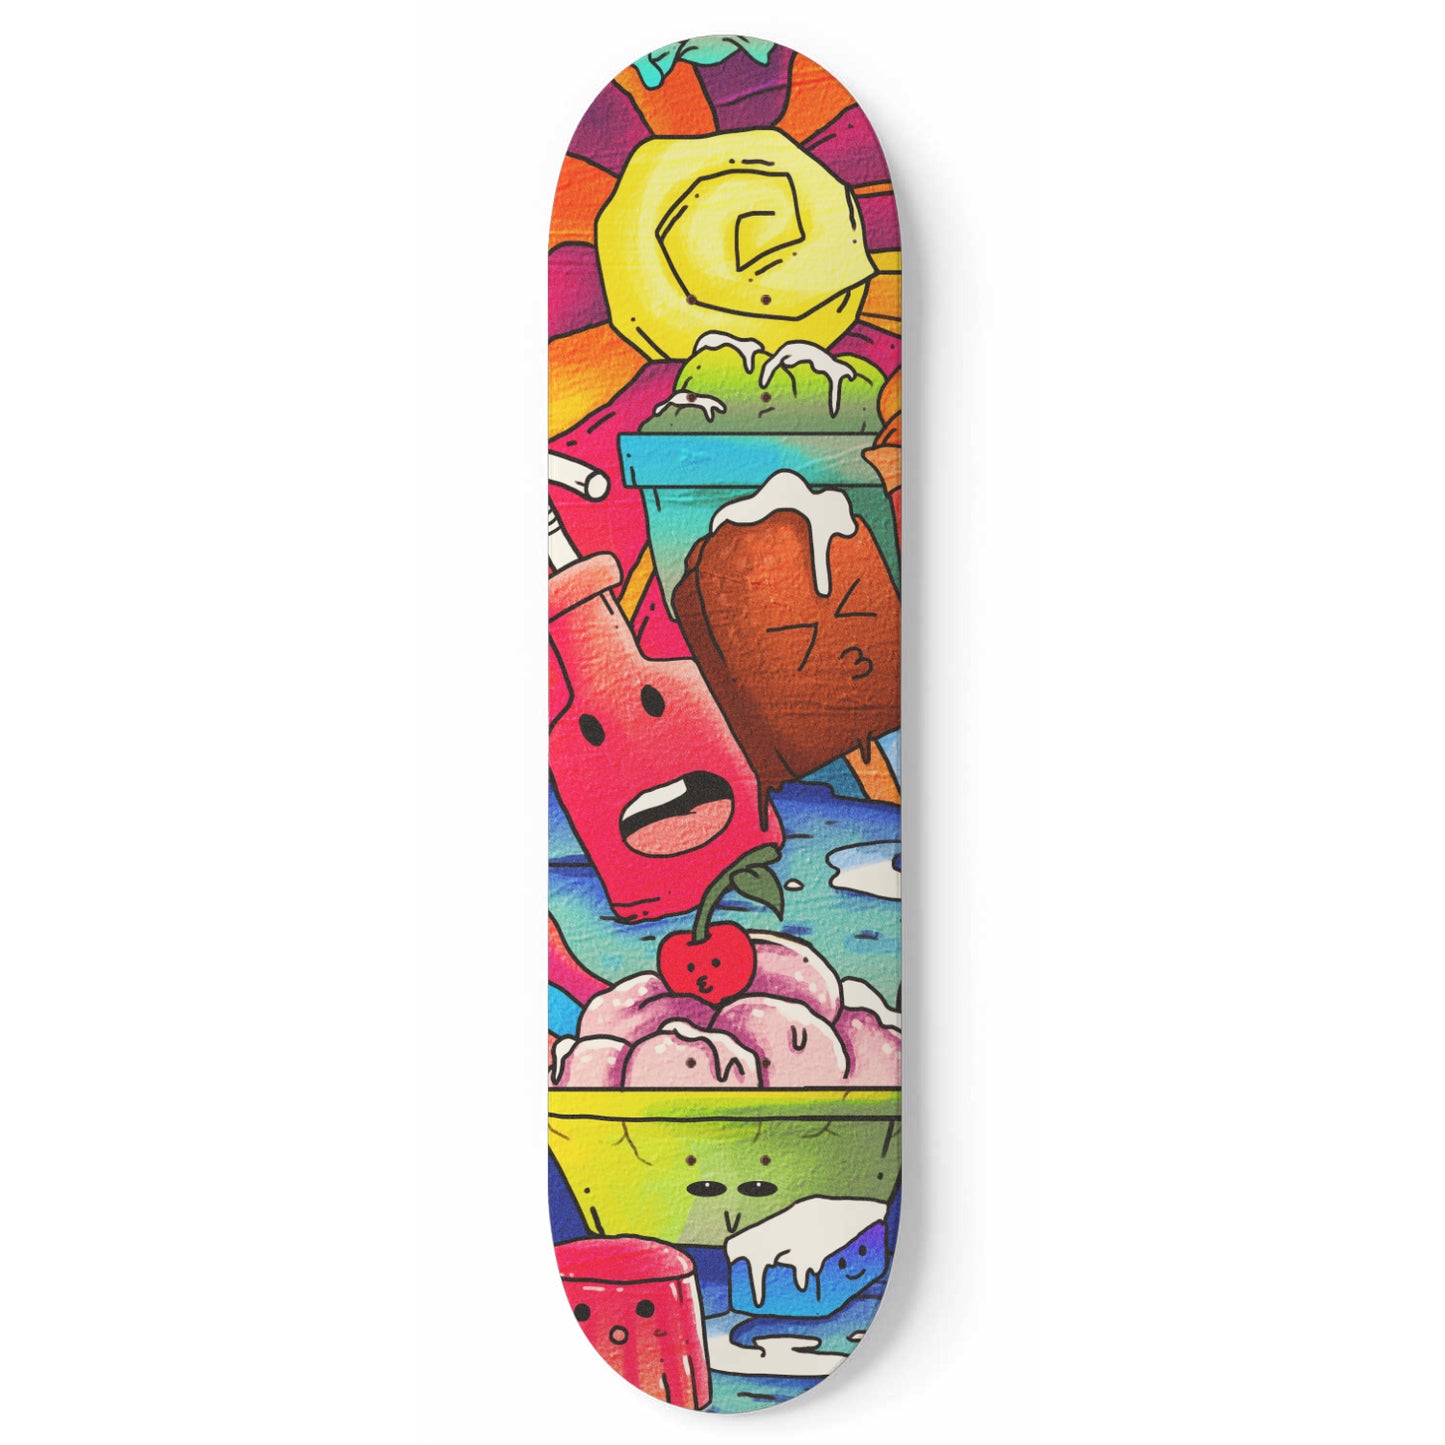 Chilling Sweets Doodle - 1 Piece Skateboard Wall Art